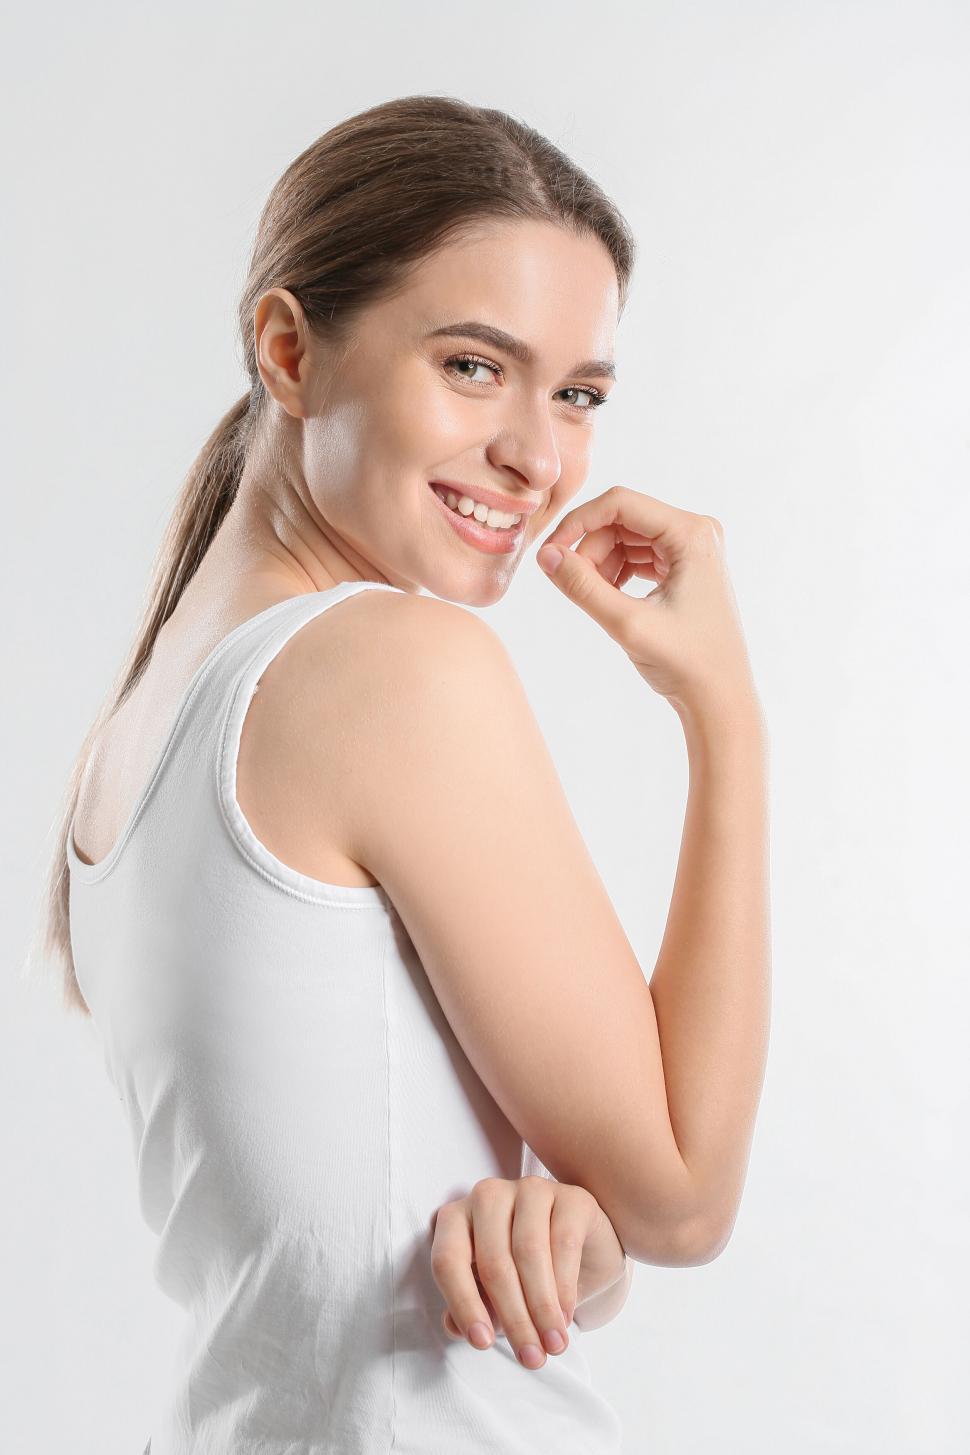 Free Image of A woman in a white tank top 